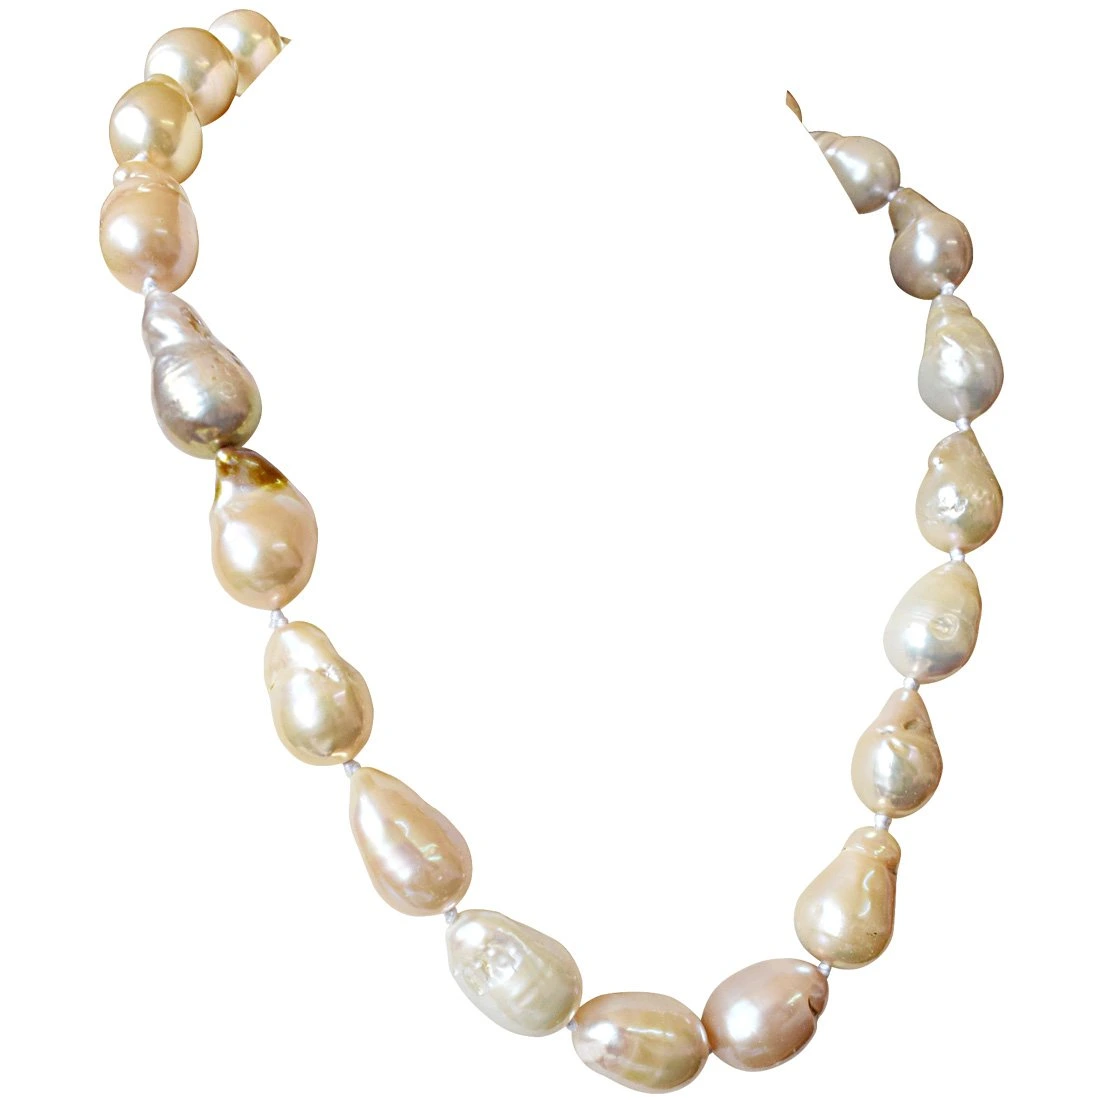 Single Line 472.55 cts Peach Real Baroque Pearl Necklace for Women (SN835-472.55cts)